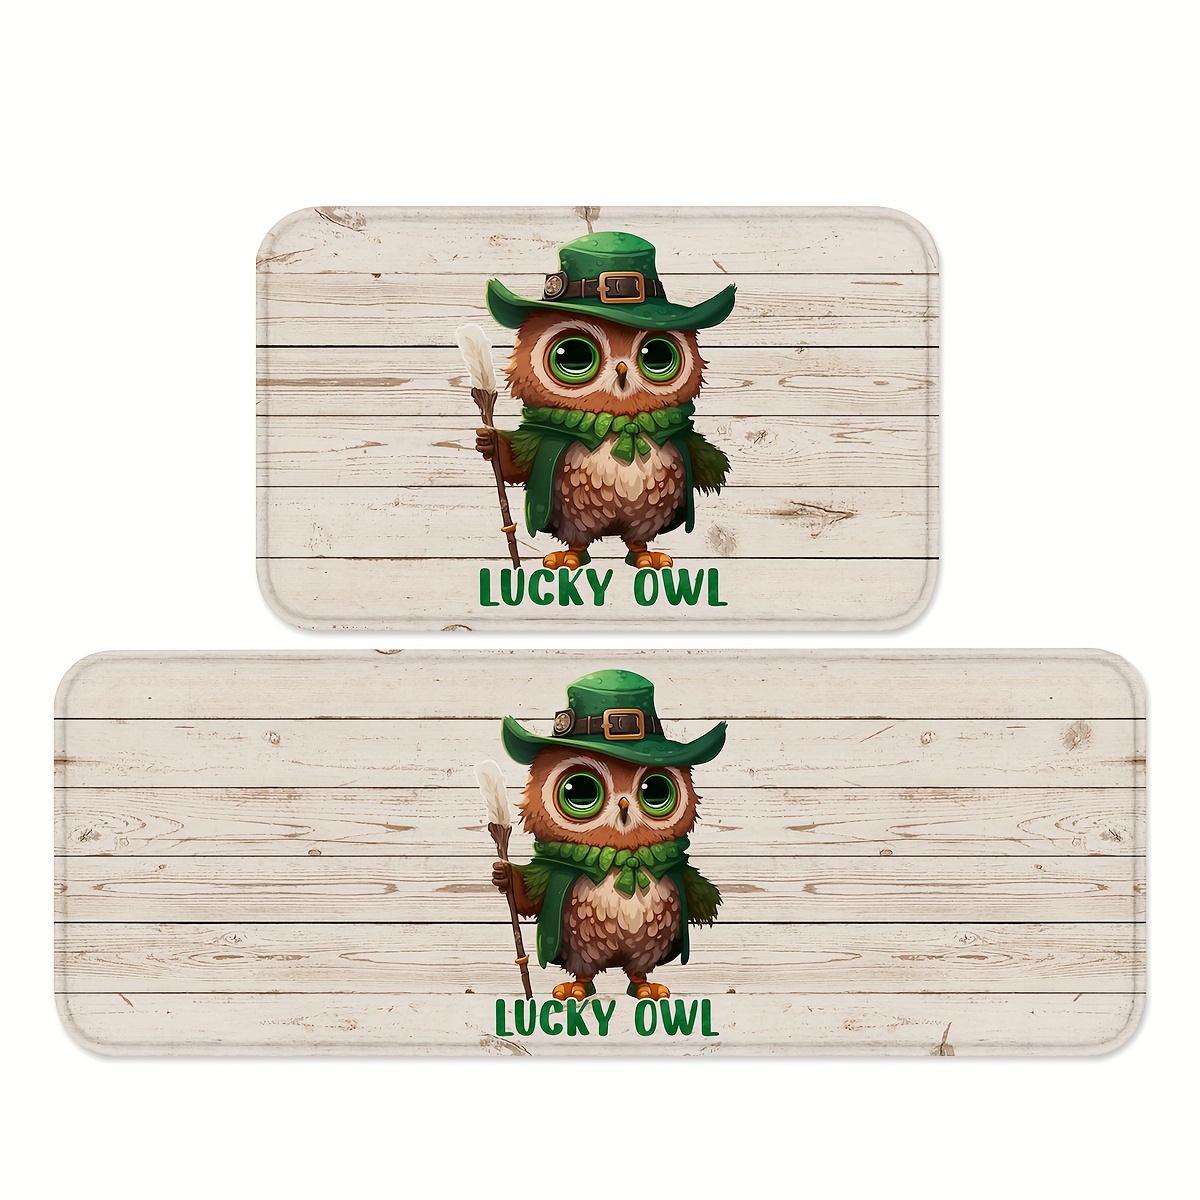 

1pc/2pcs Lucky Owl Print Kitchen Mats, Indoor Decorative Rugs, Wood Grain Motif Carpets, Non-slip Throw Pads, For Bathroom Kitchen Home Decor Office Sink Laundry Bathroom, Sets 2 Piece